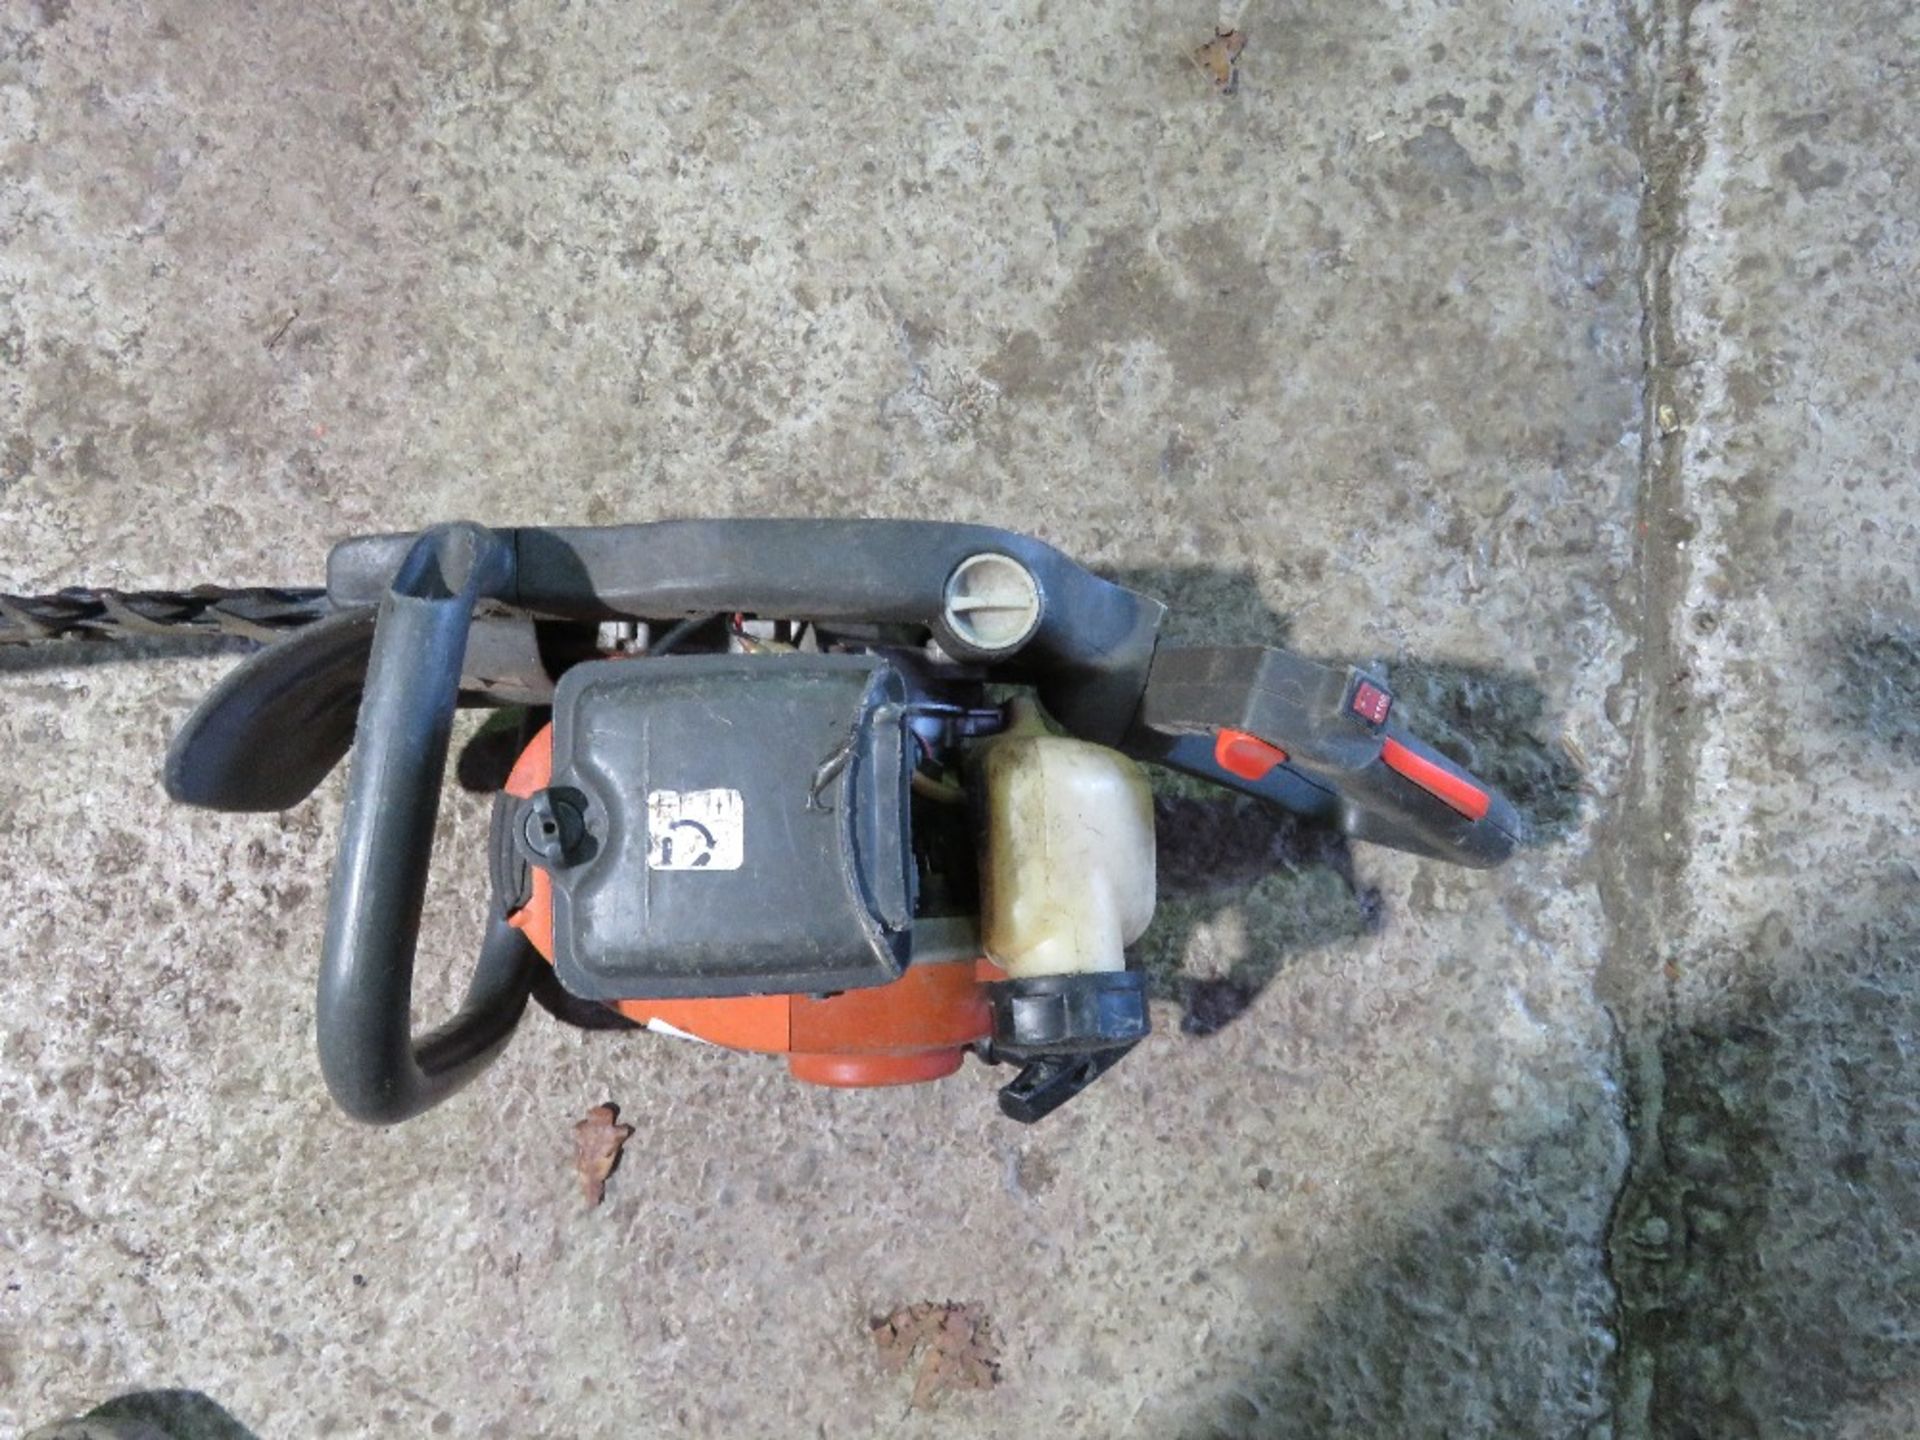 HUSQVARNA PETROL HEDGE CUTTER. THIS LOT IS SOLD UNDER THE AUCTIONEERS MARGIN SCHEME, THEREFORE NO - Image 3 of 5